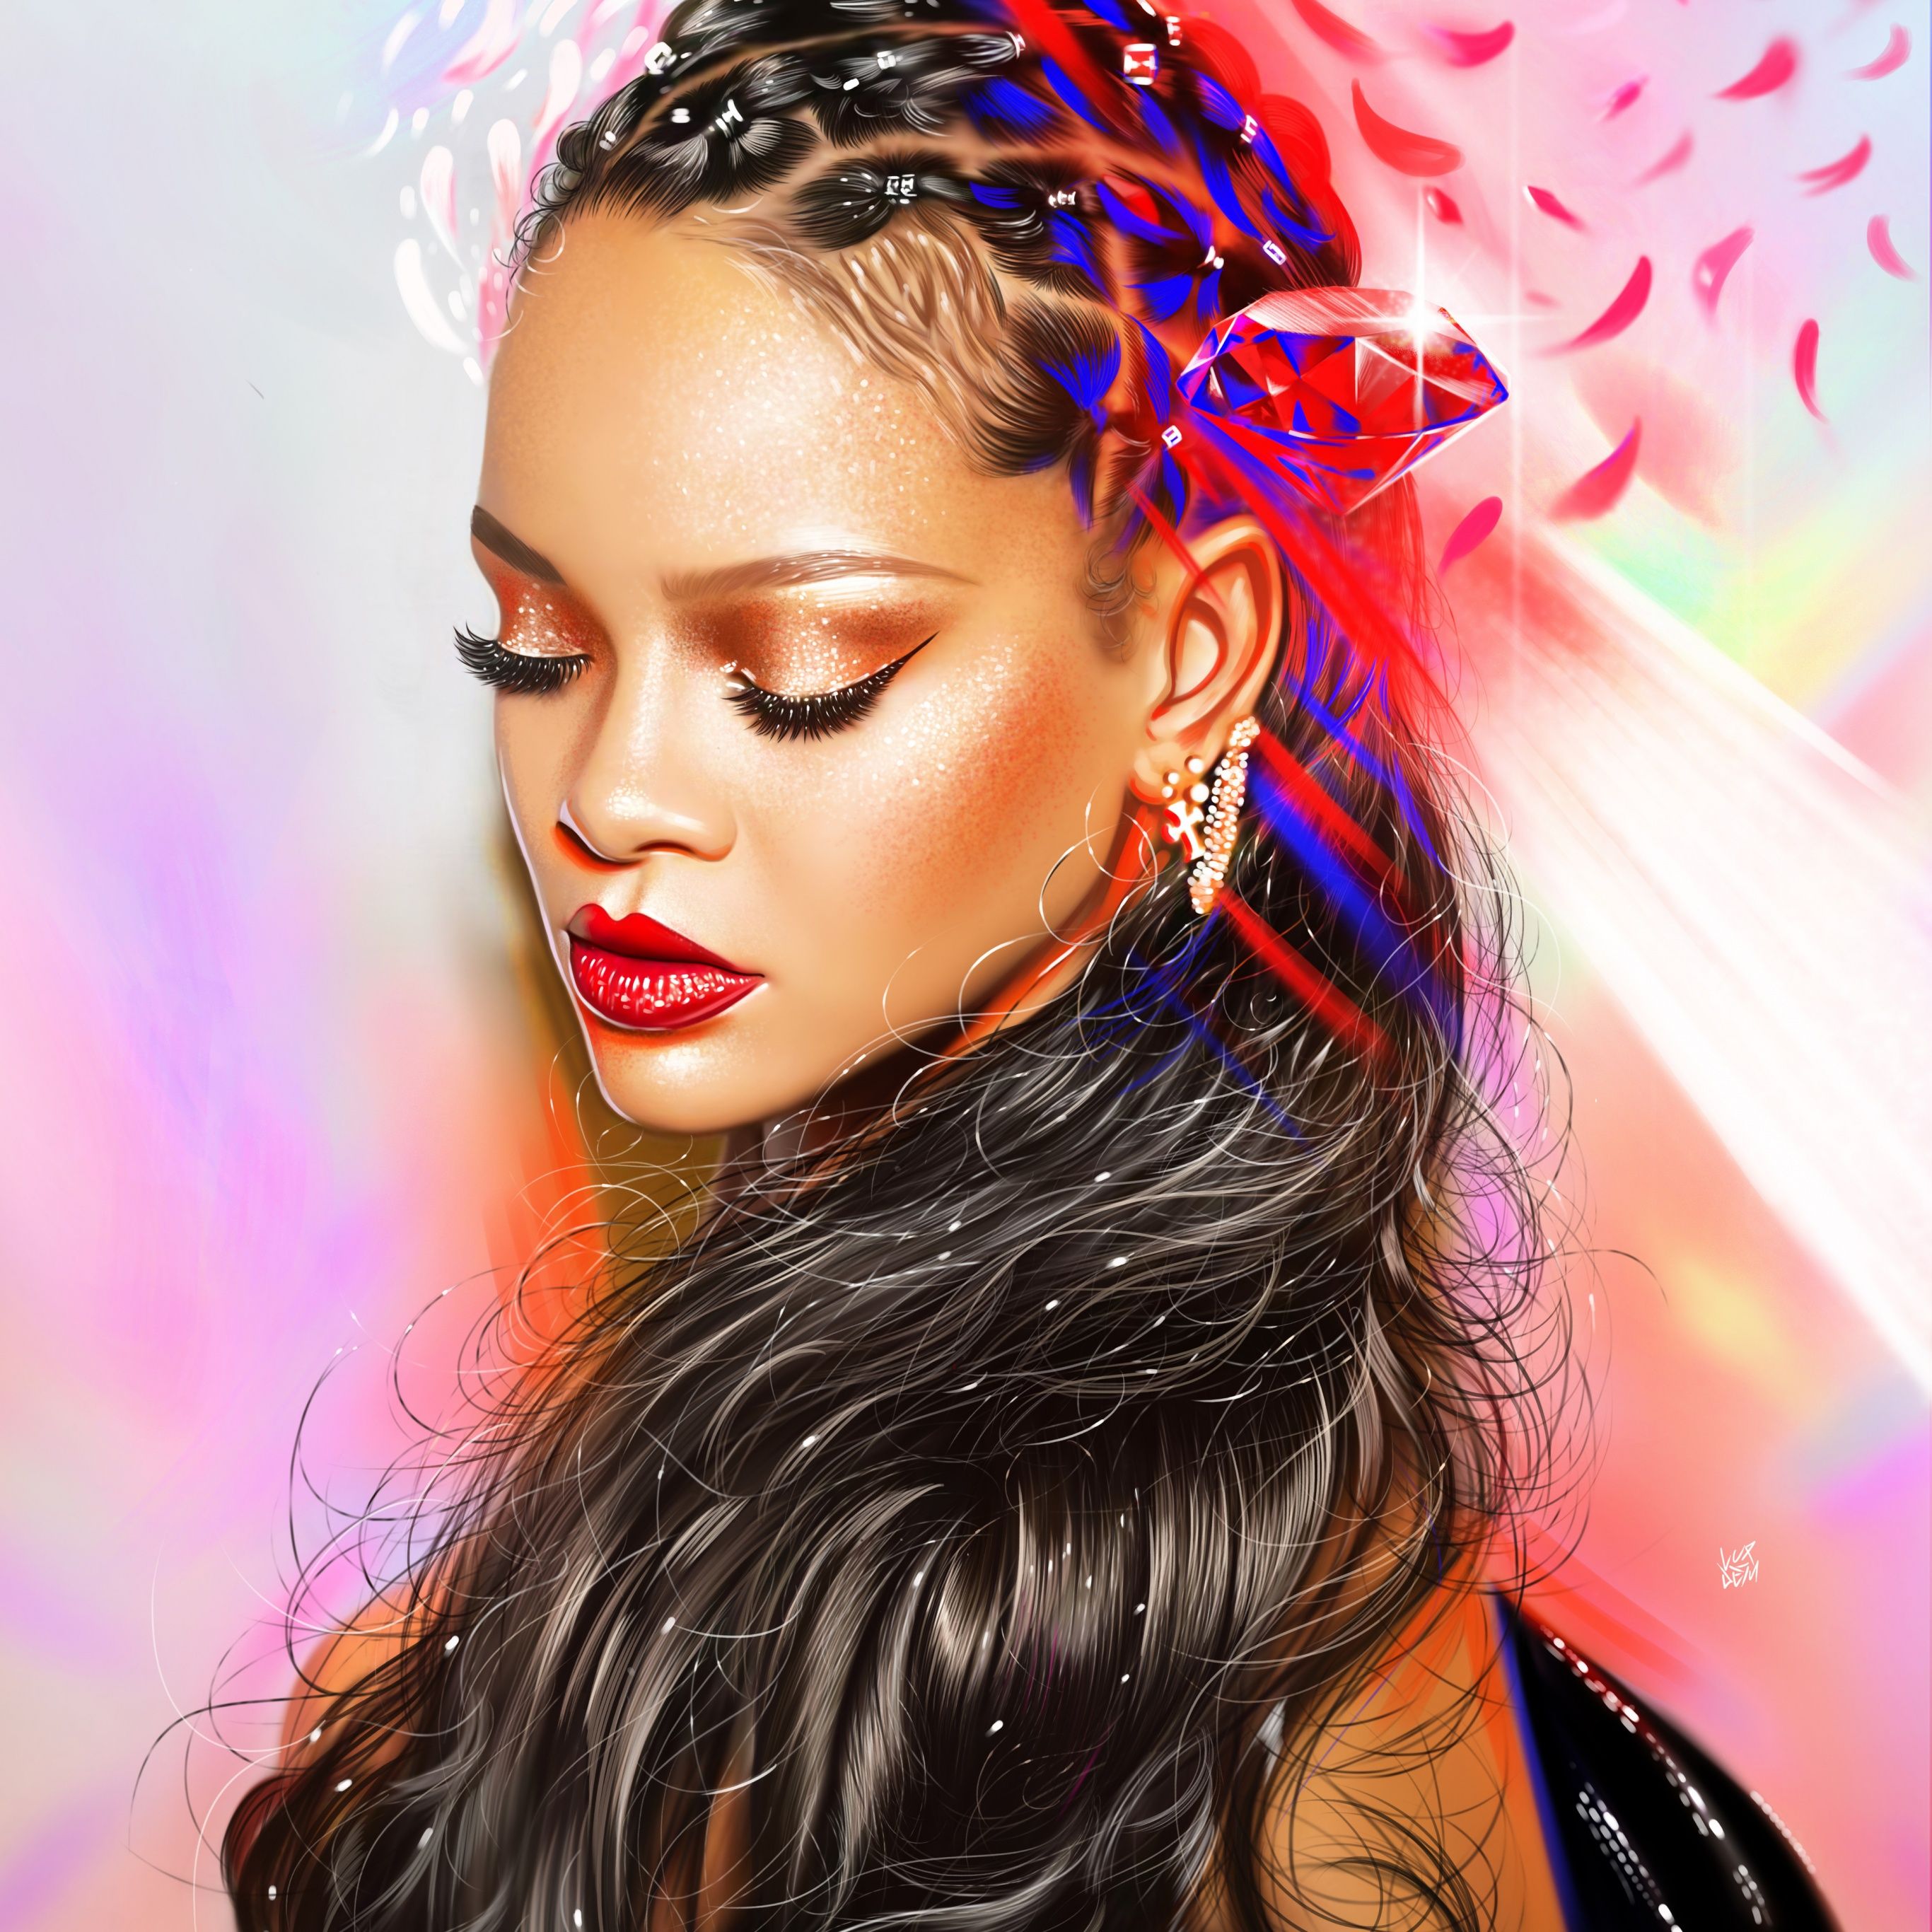 A digital painting of a woman with long hair and a red bow in her hair. - Rihanna